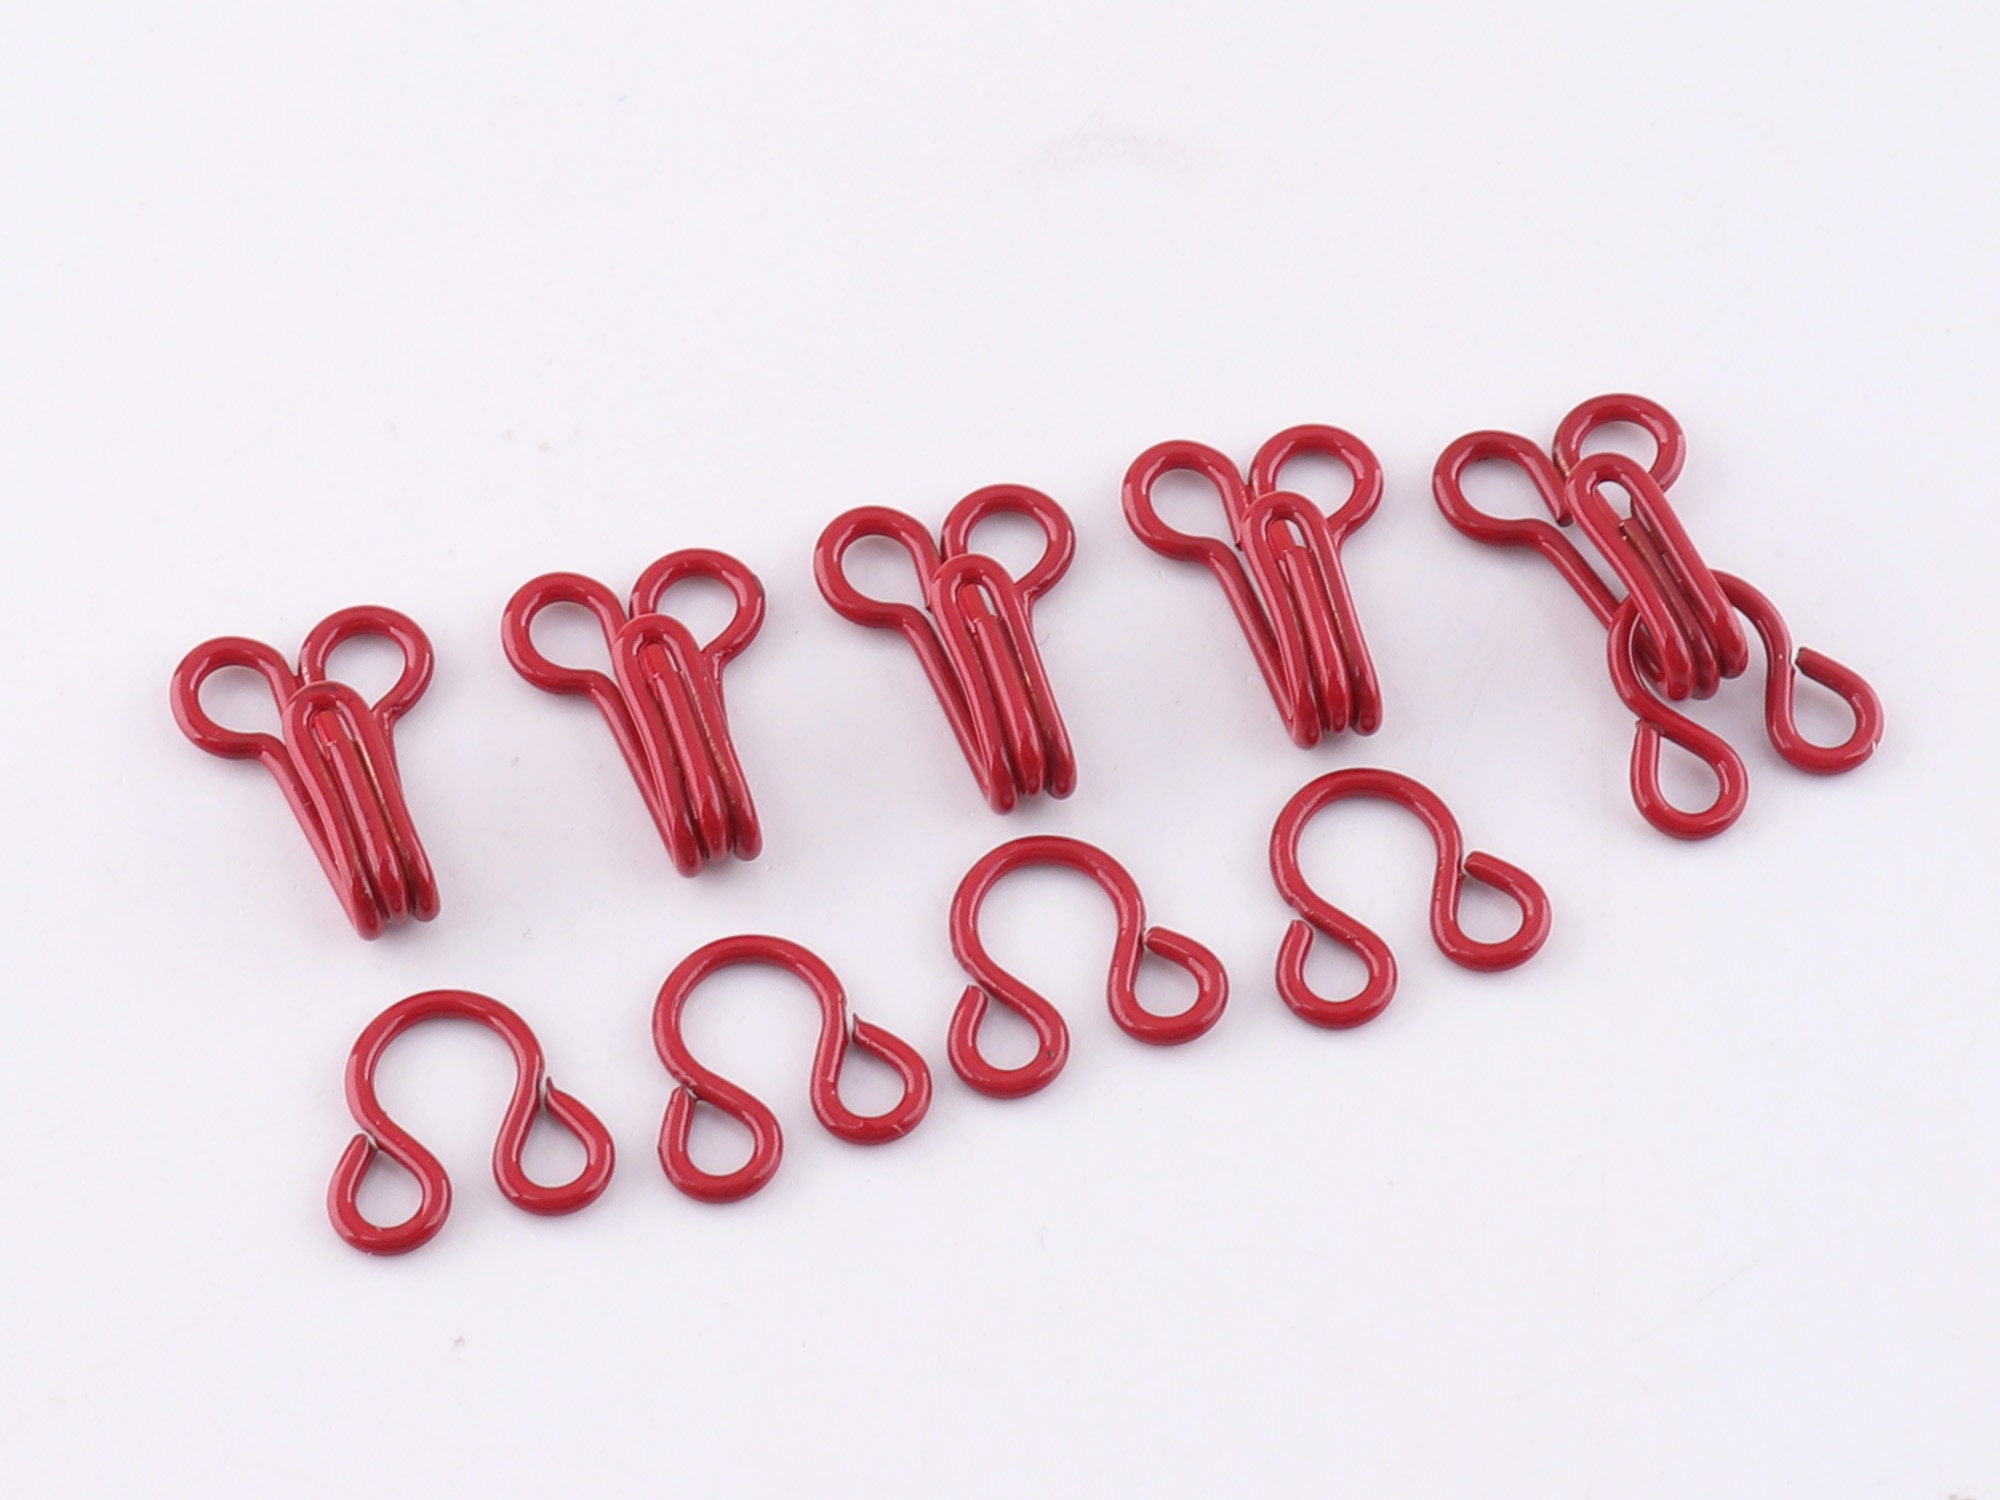 50 Pairs Skirt Hooks and Eyes Hook and Eye Latch for Clothing Bra Trousers  Skirt Dress&Sewing DIY Garment Accessories Craft